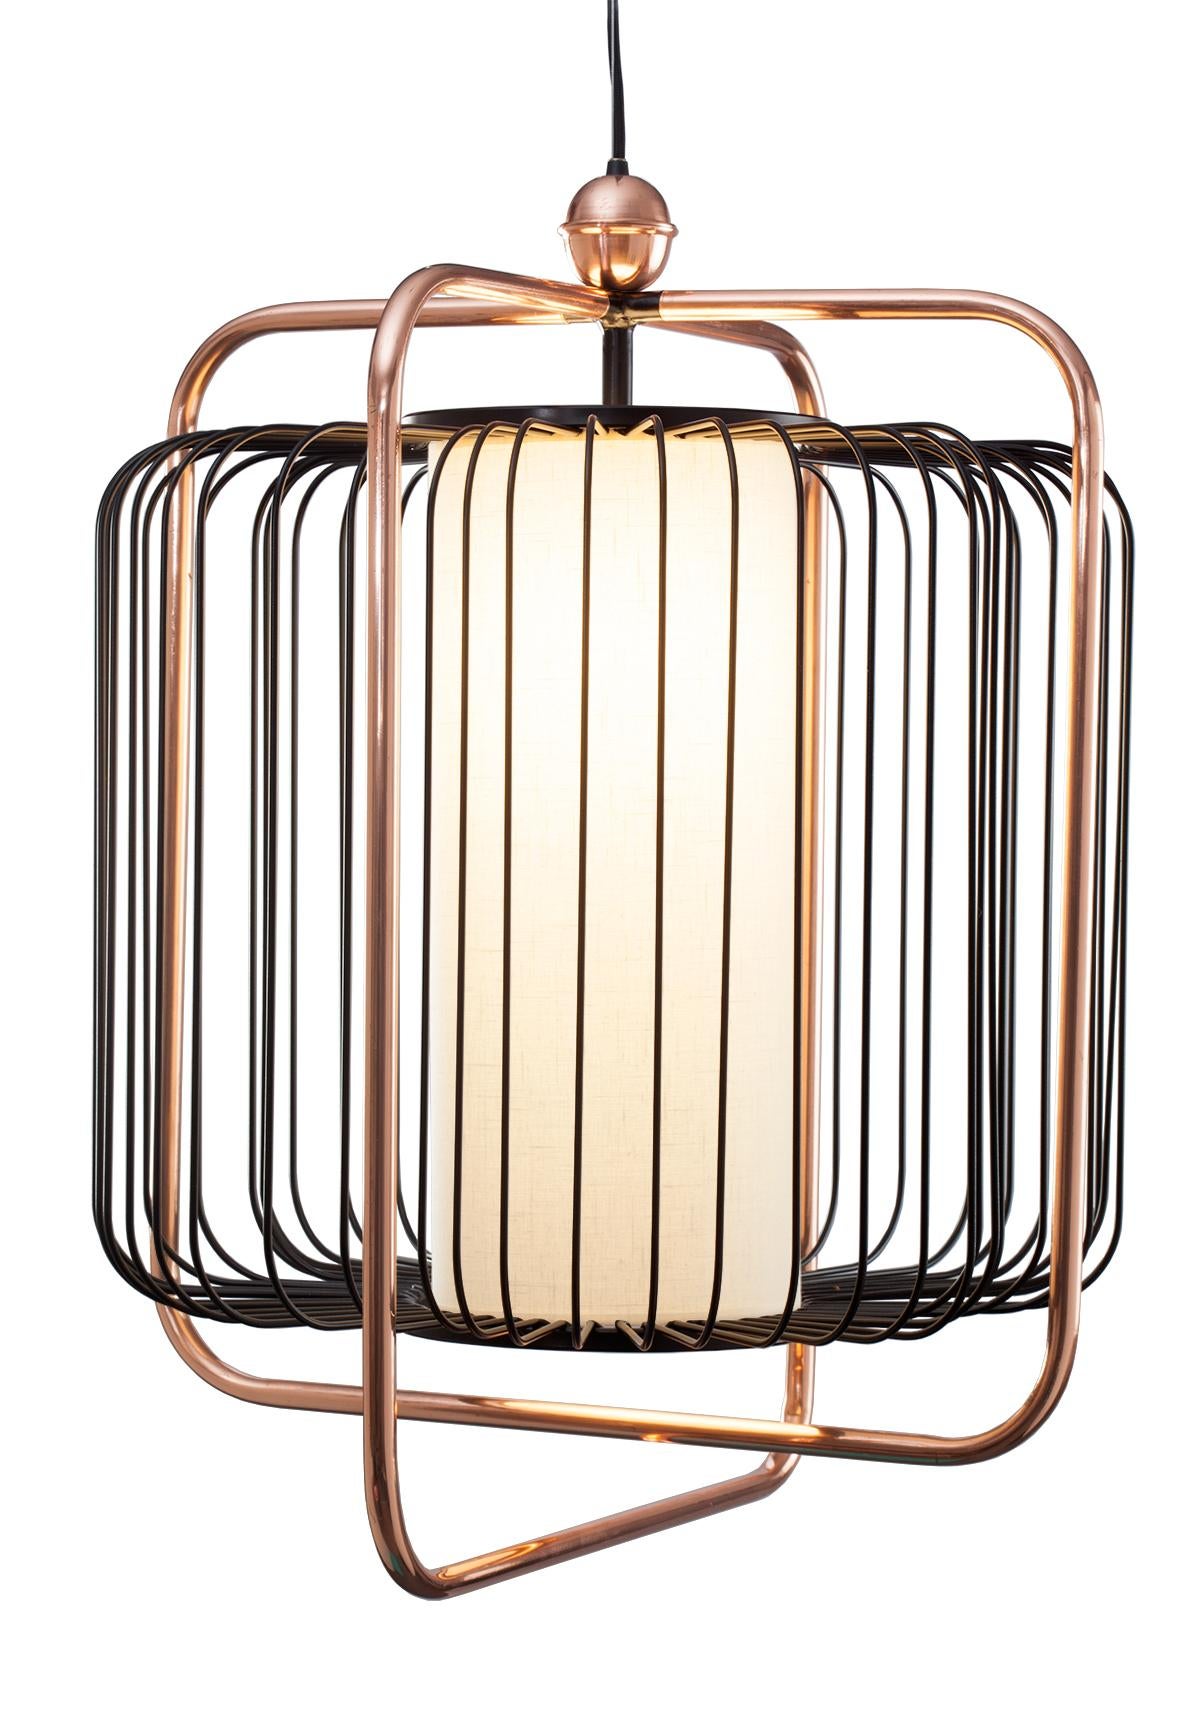 Jules is all about a timeless, effortless sophistication. A perfect combination of polished brass or copper with fun lacquered metal colors and a soft and elegant linen shade that softly diffuses the light enclosed in the structure.
The structure is